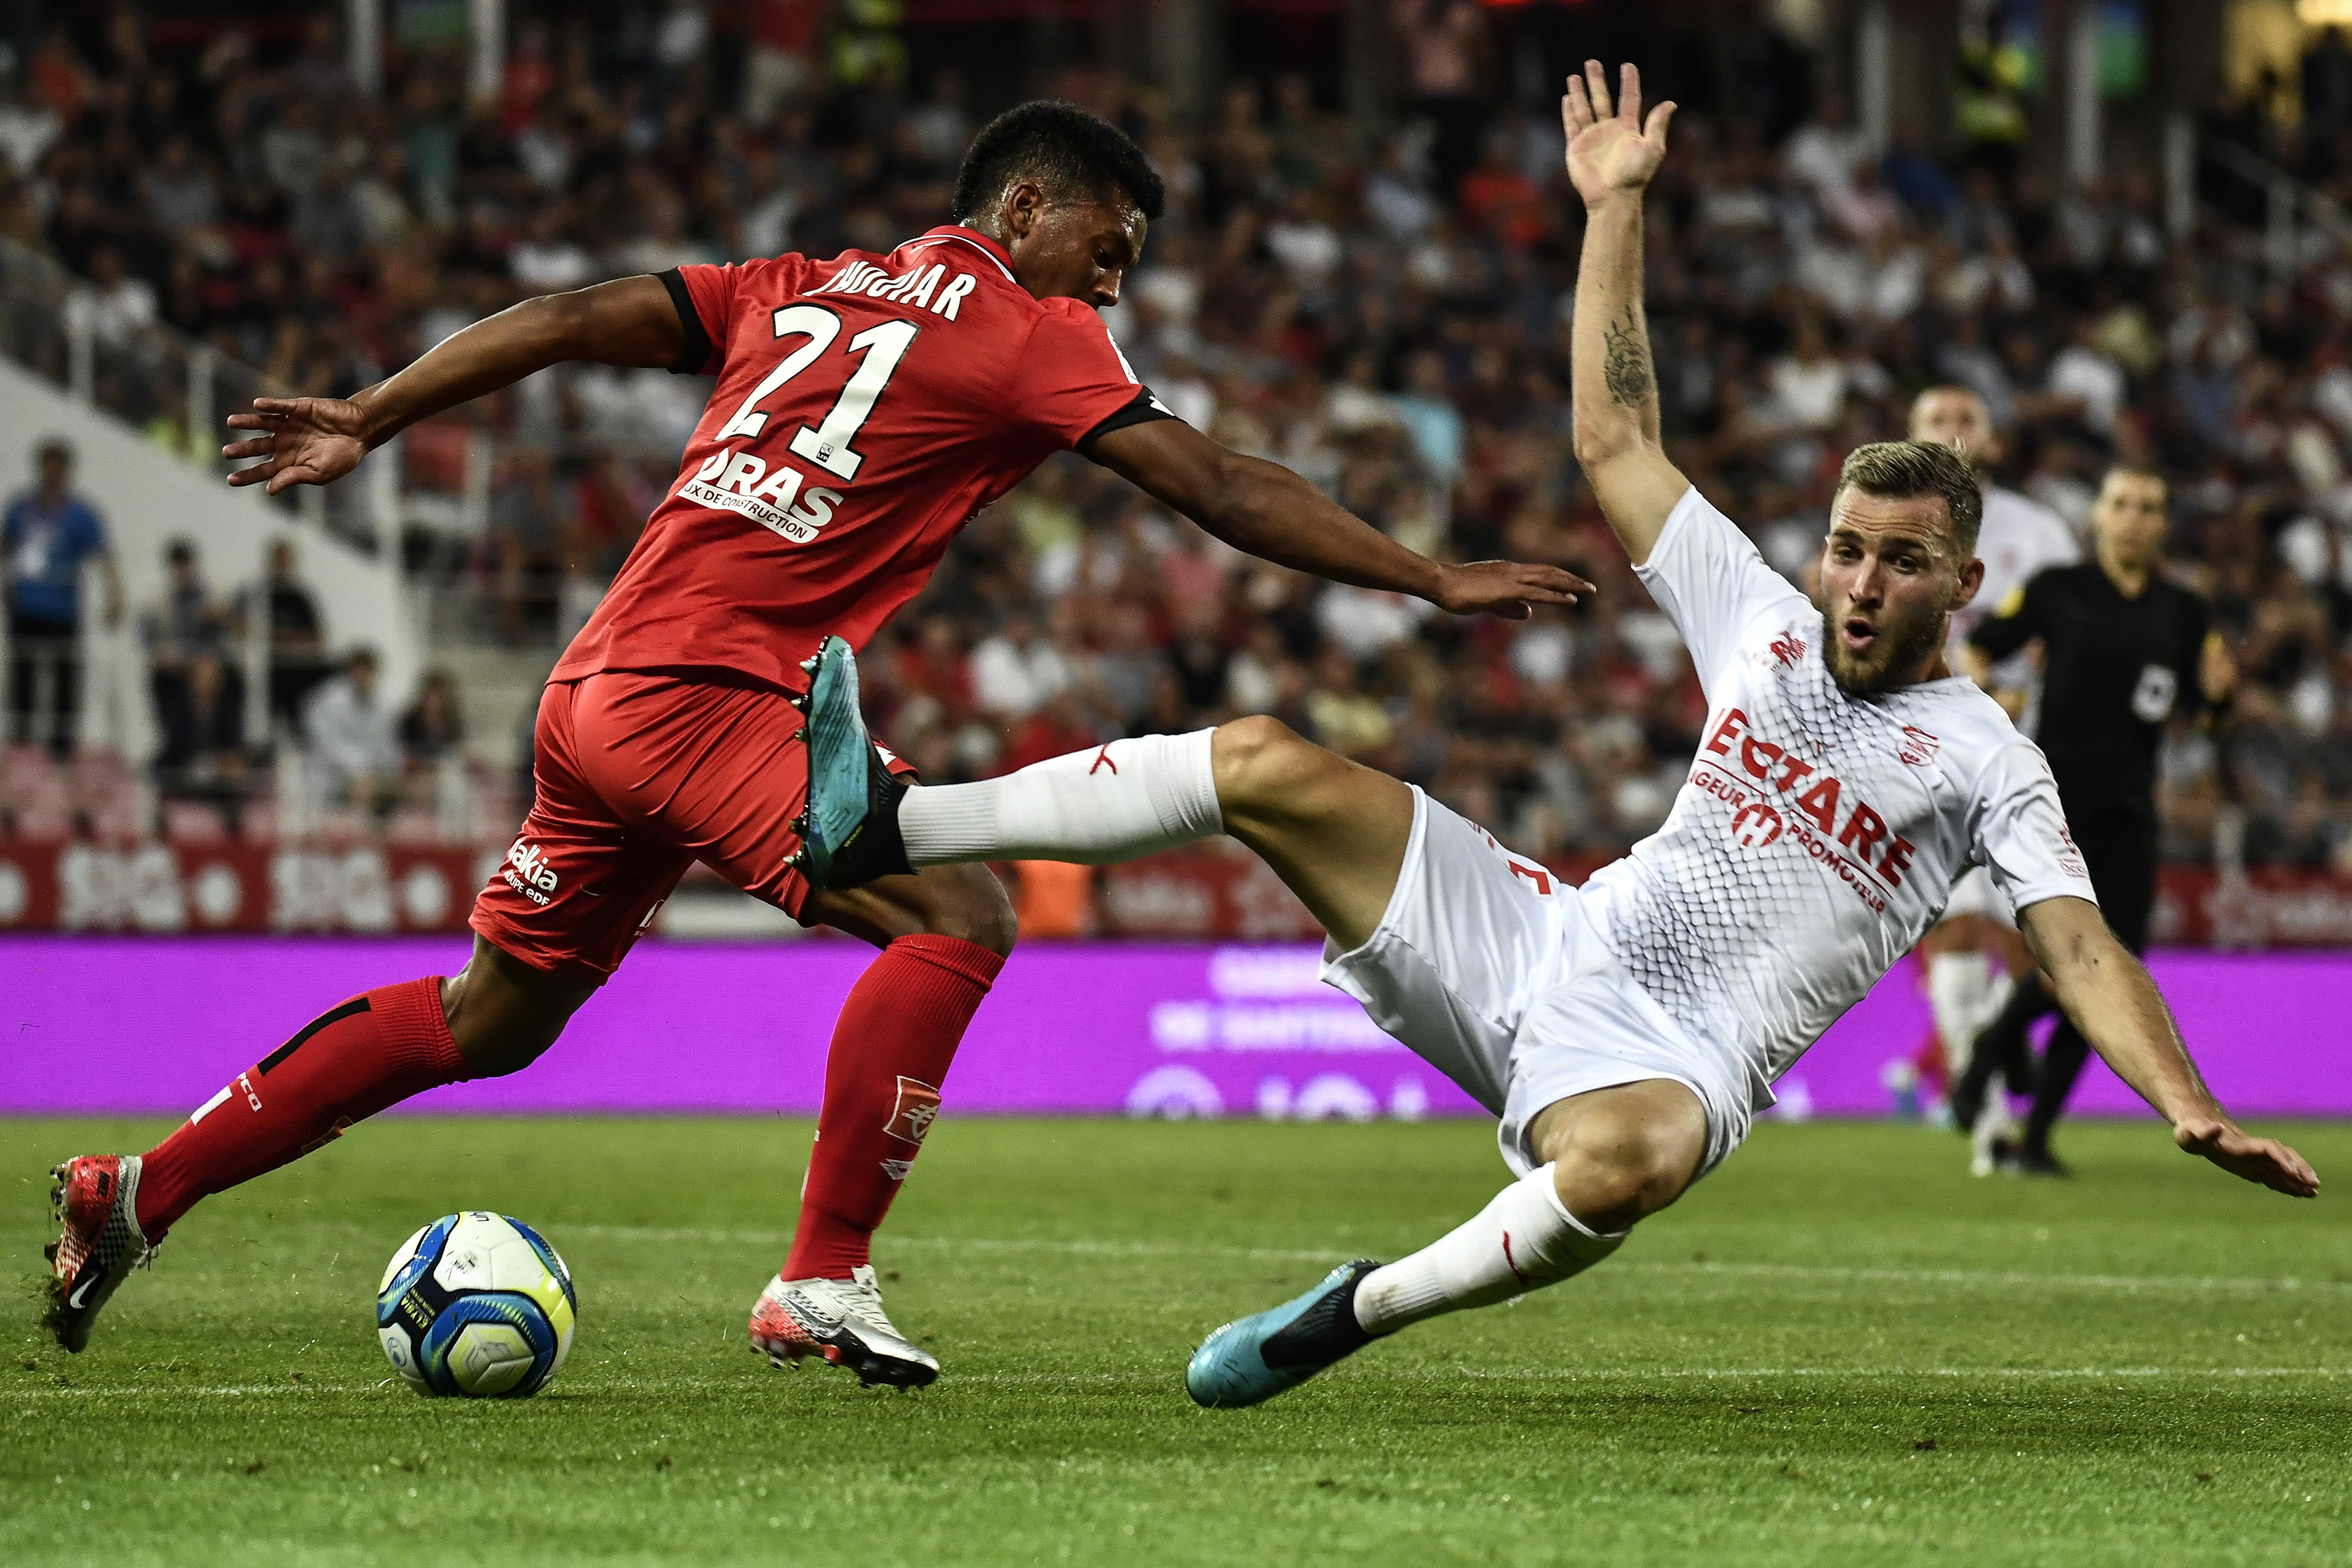 Nimes' French defender Gaetan Paquiez (R) vies with Dijon's French forward Mounir Chouiar (L) during the French L1 football match Dijon (DFCO) vs Nimes Olympique on September 14, 2019 in Gaston Gerard stadium in Dijon. (Photo by JEFF PACHOUD / AFP)        (Photo credit should read JEFF PACHOUD/AFP via Getty Images)